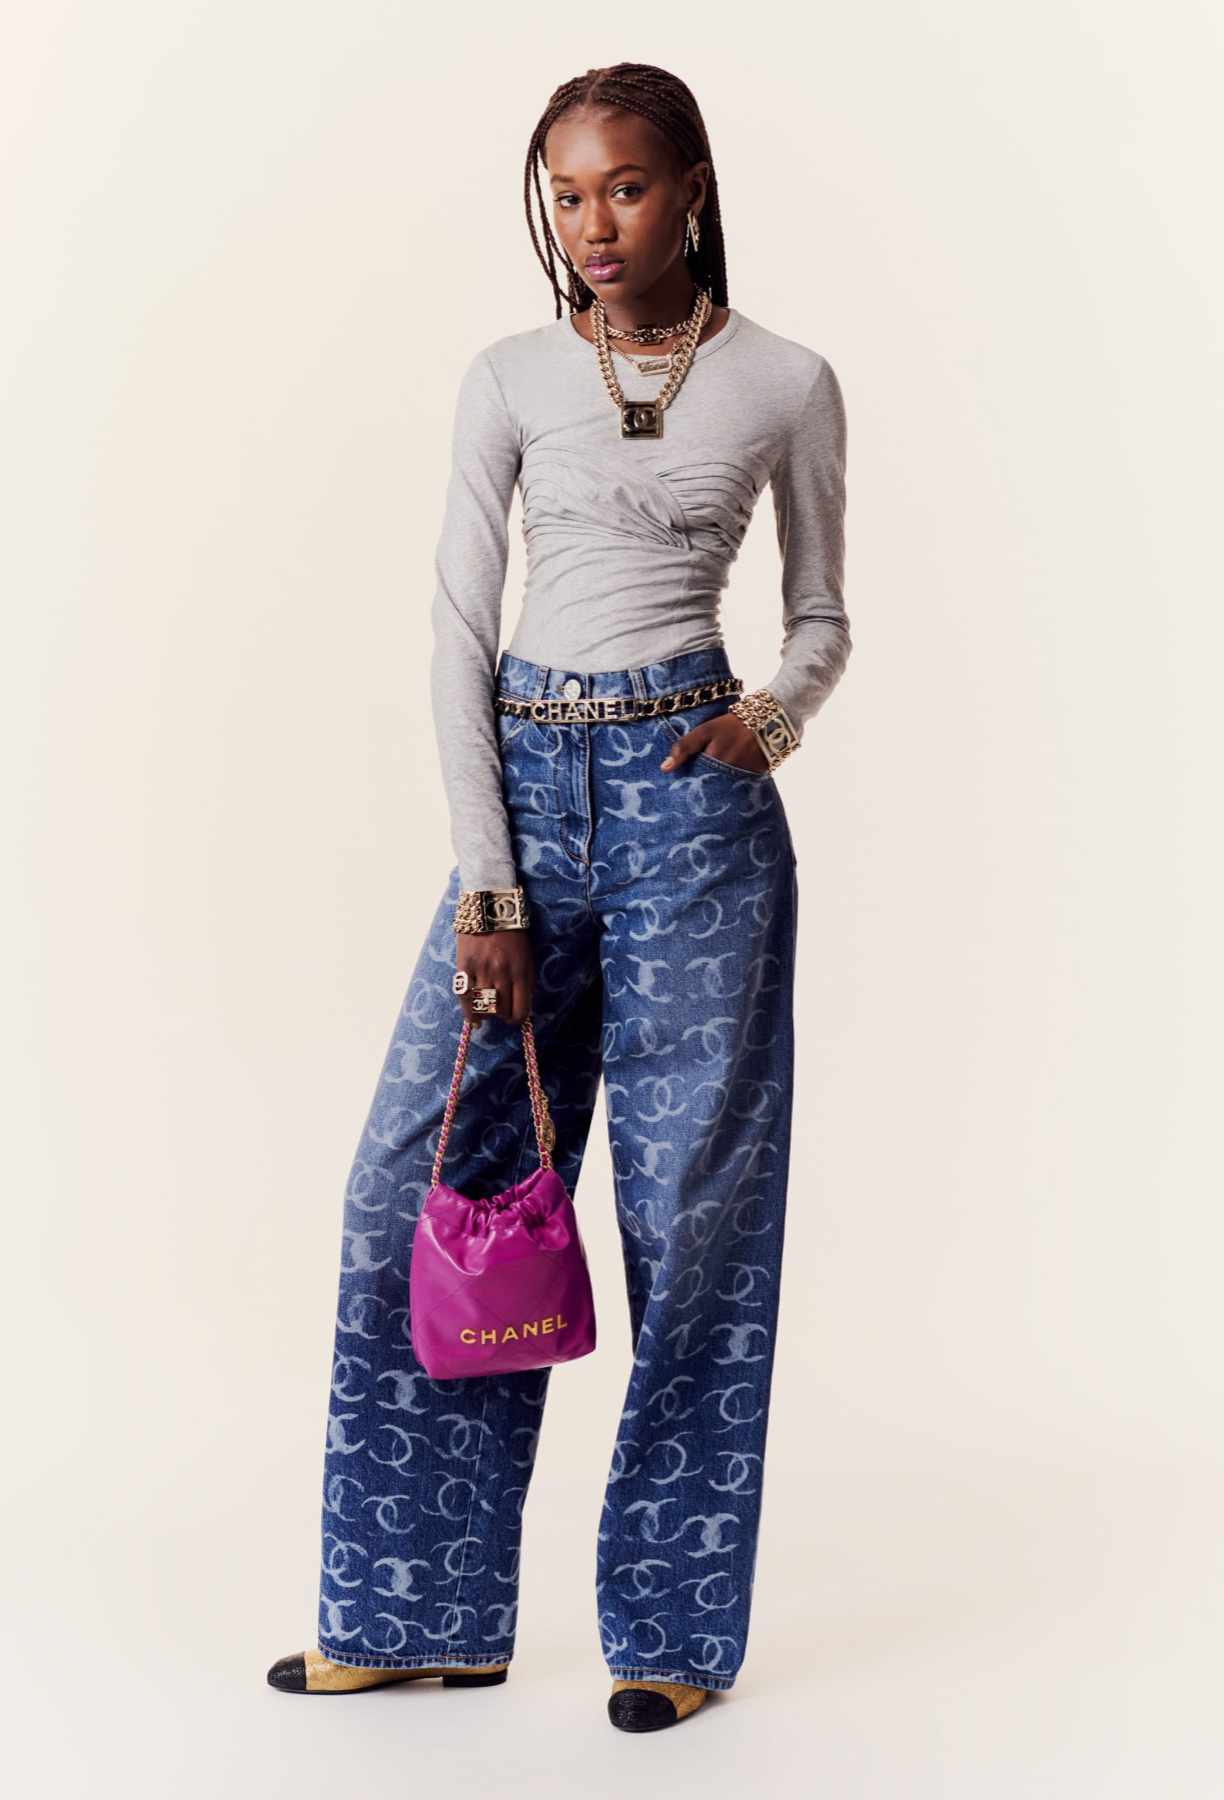 Chanel's Buzzy $2.5k Denim Jeans Are Reselling for Over $6k